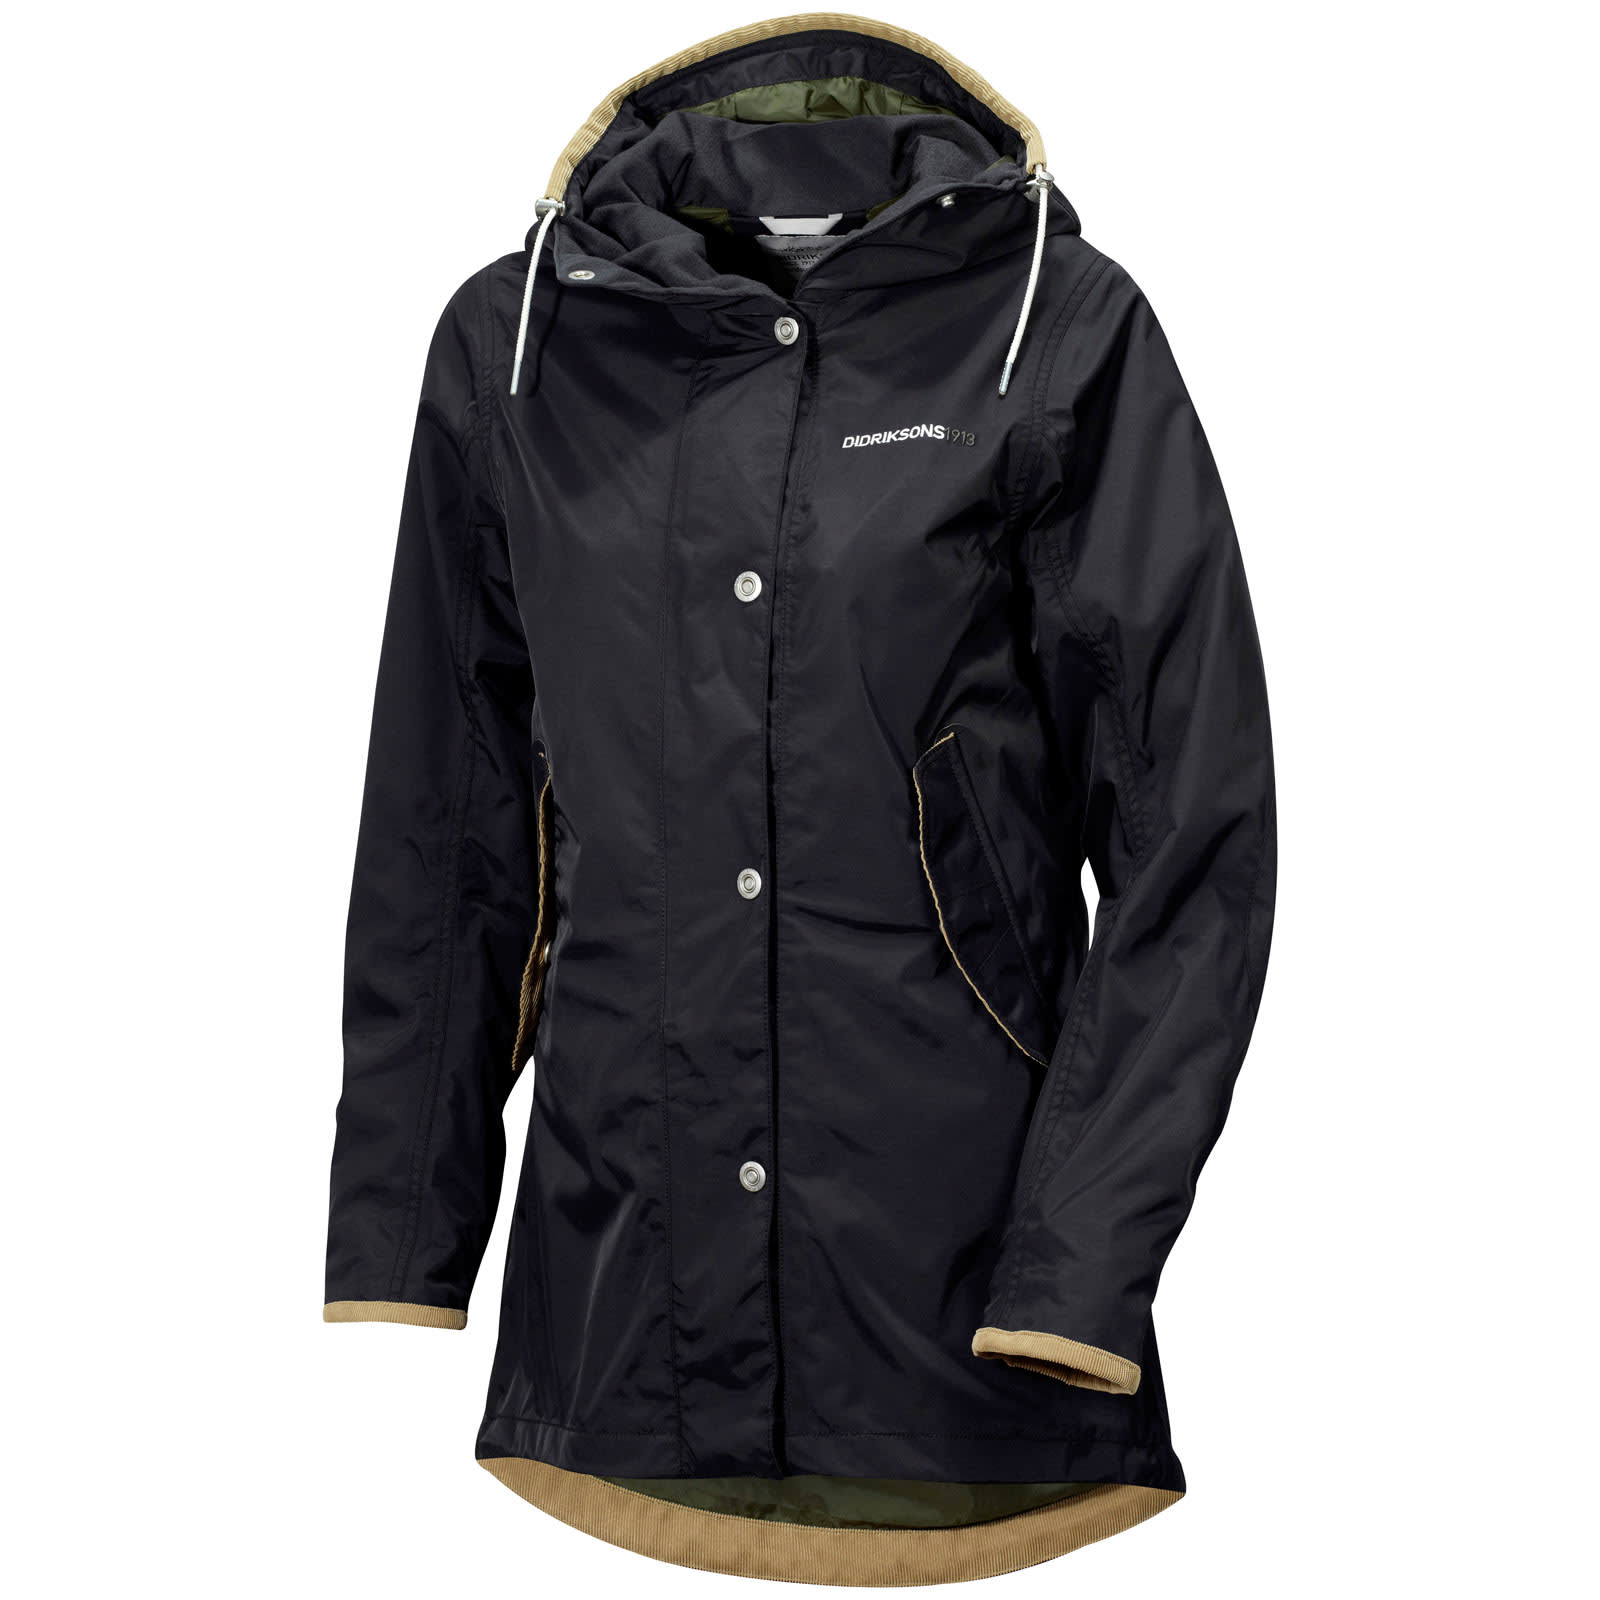 at føre Land med statsborgerskab Monica Buy Didriksons Olivia Women's Jacket from Outnorth